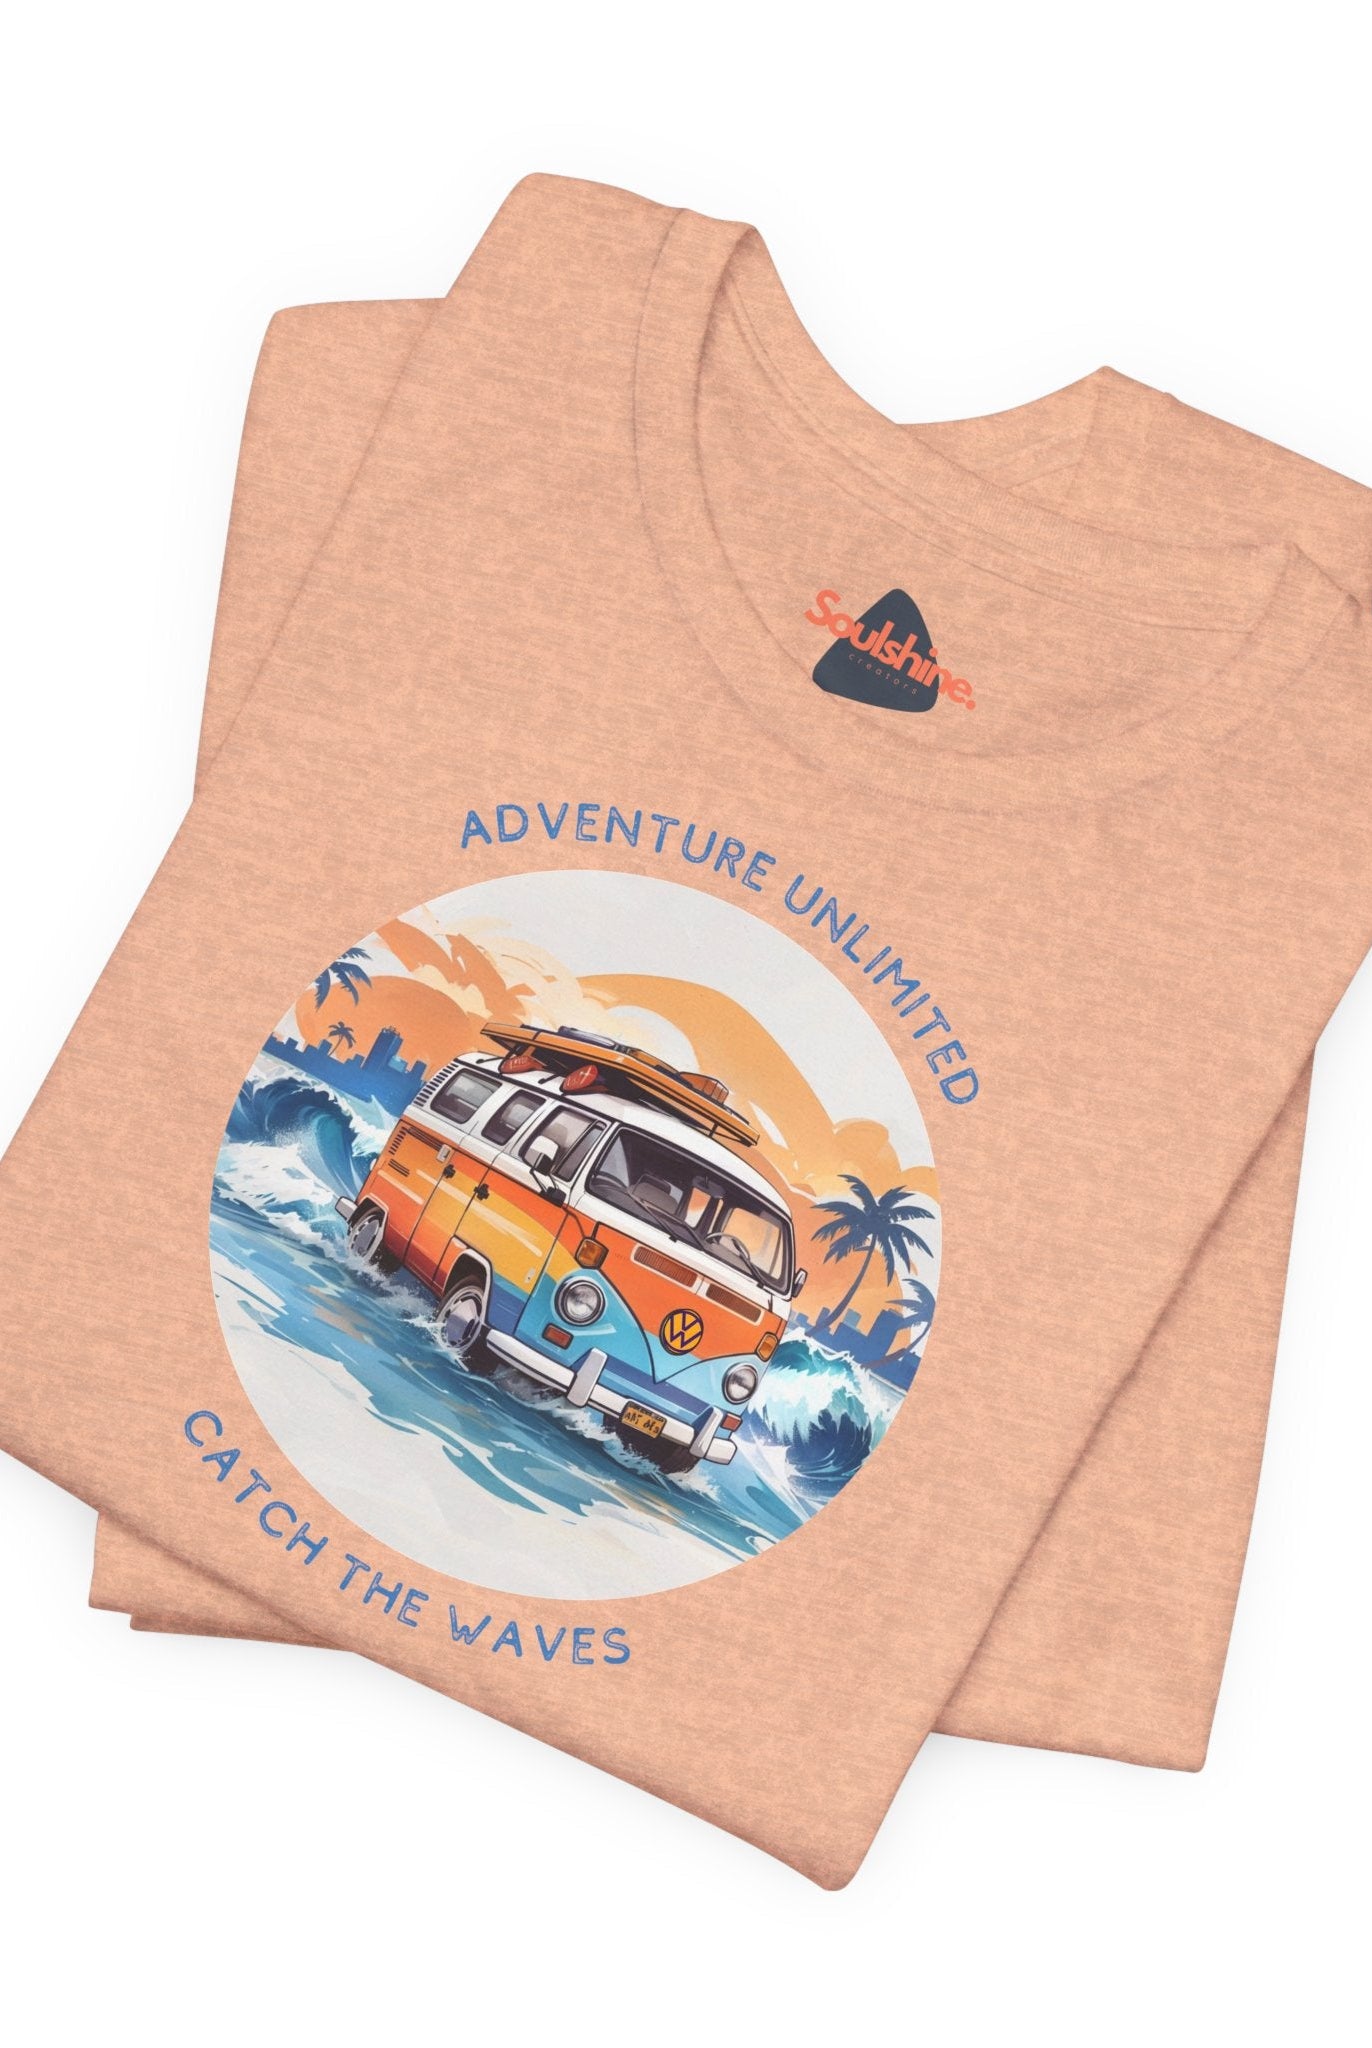 Adventure Unlimited Surfing T-Shirt featuring a van on the beach, Bella & Canvas EU direct-to-garment printed item